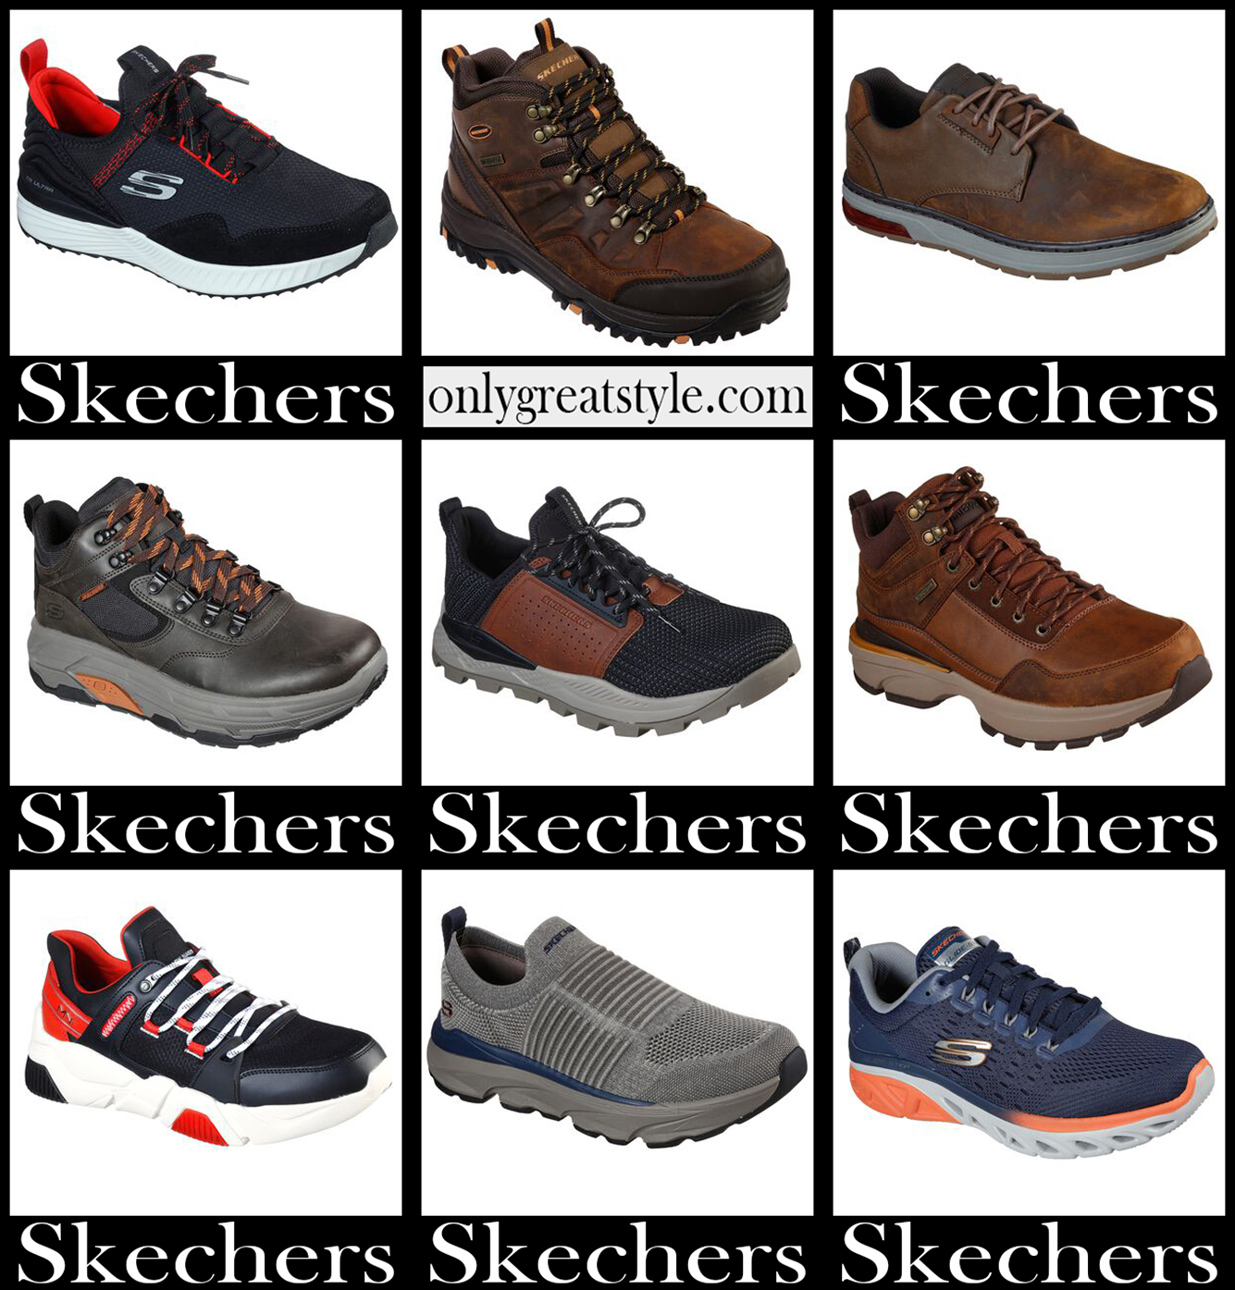 new sketcher shoes